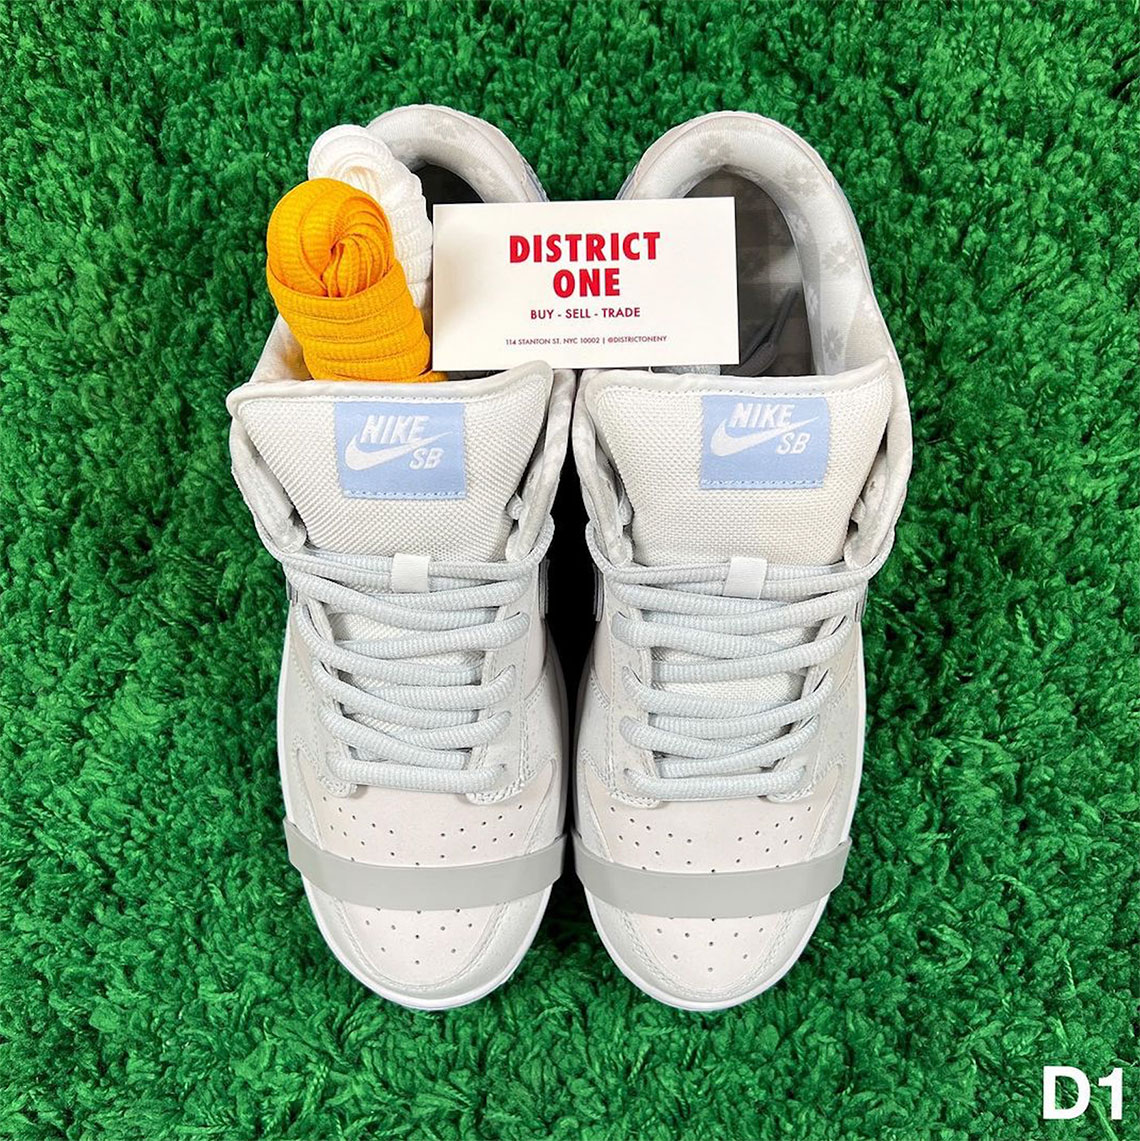 White Lobster Nike Sb Dunk Concepts 4